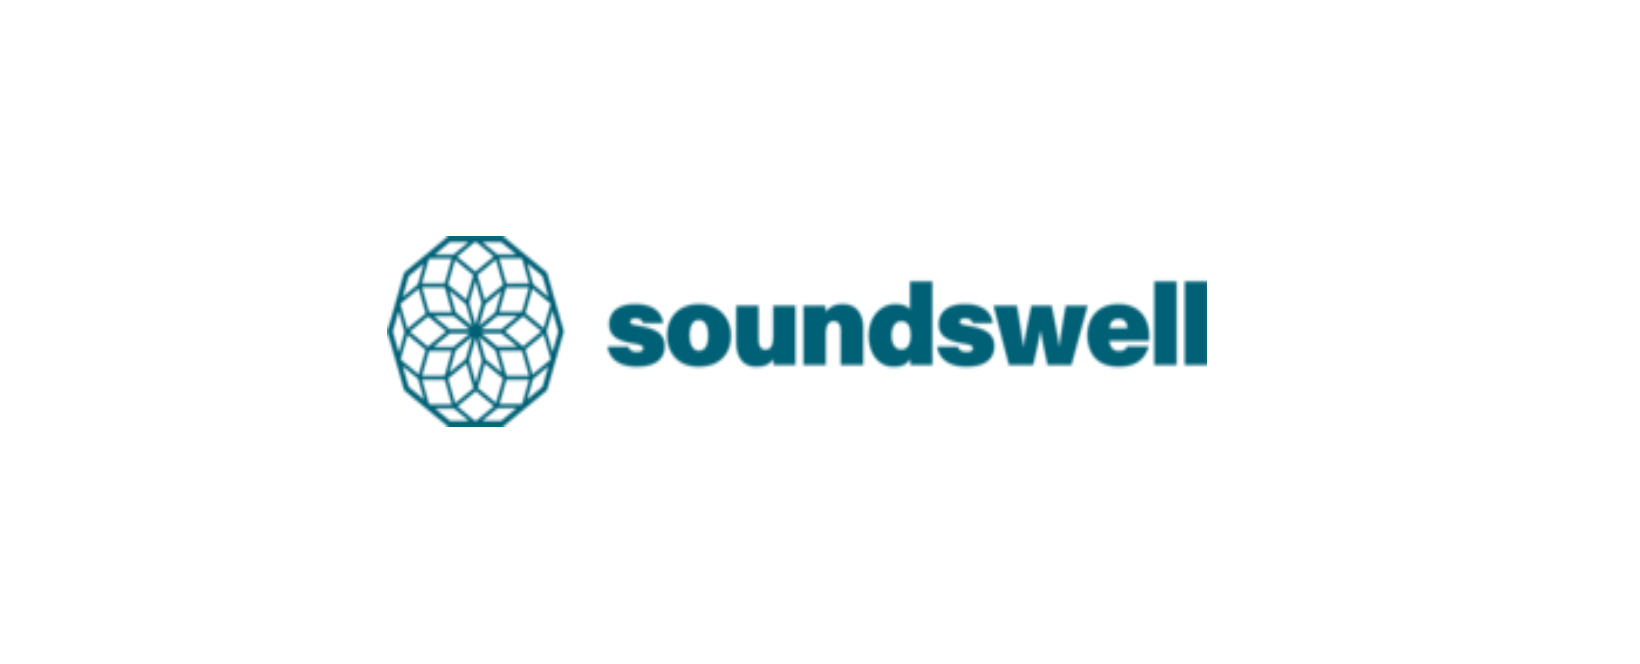 SoundSwell Discount Code 2022